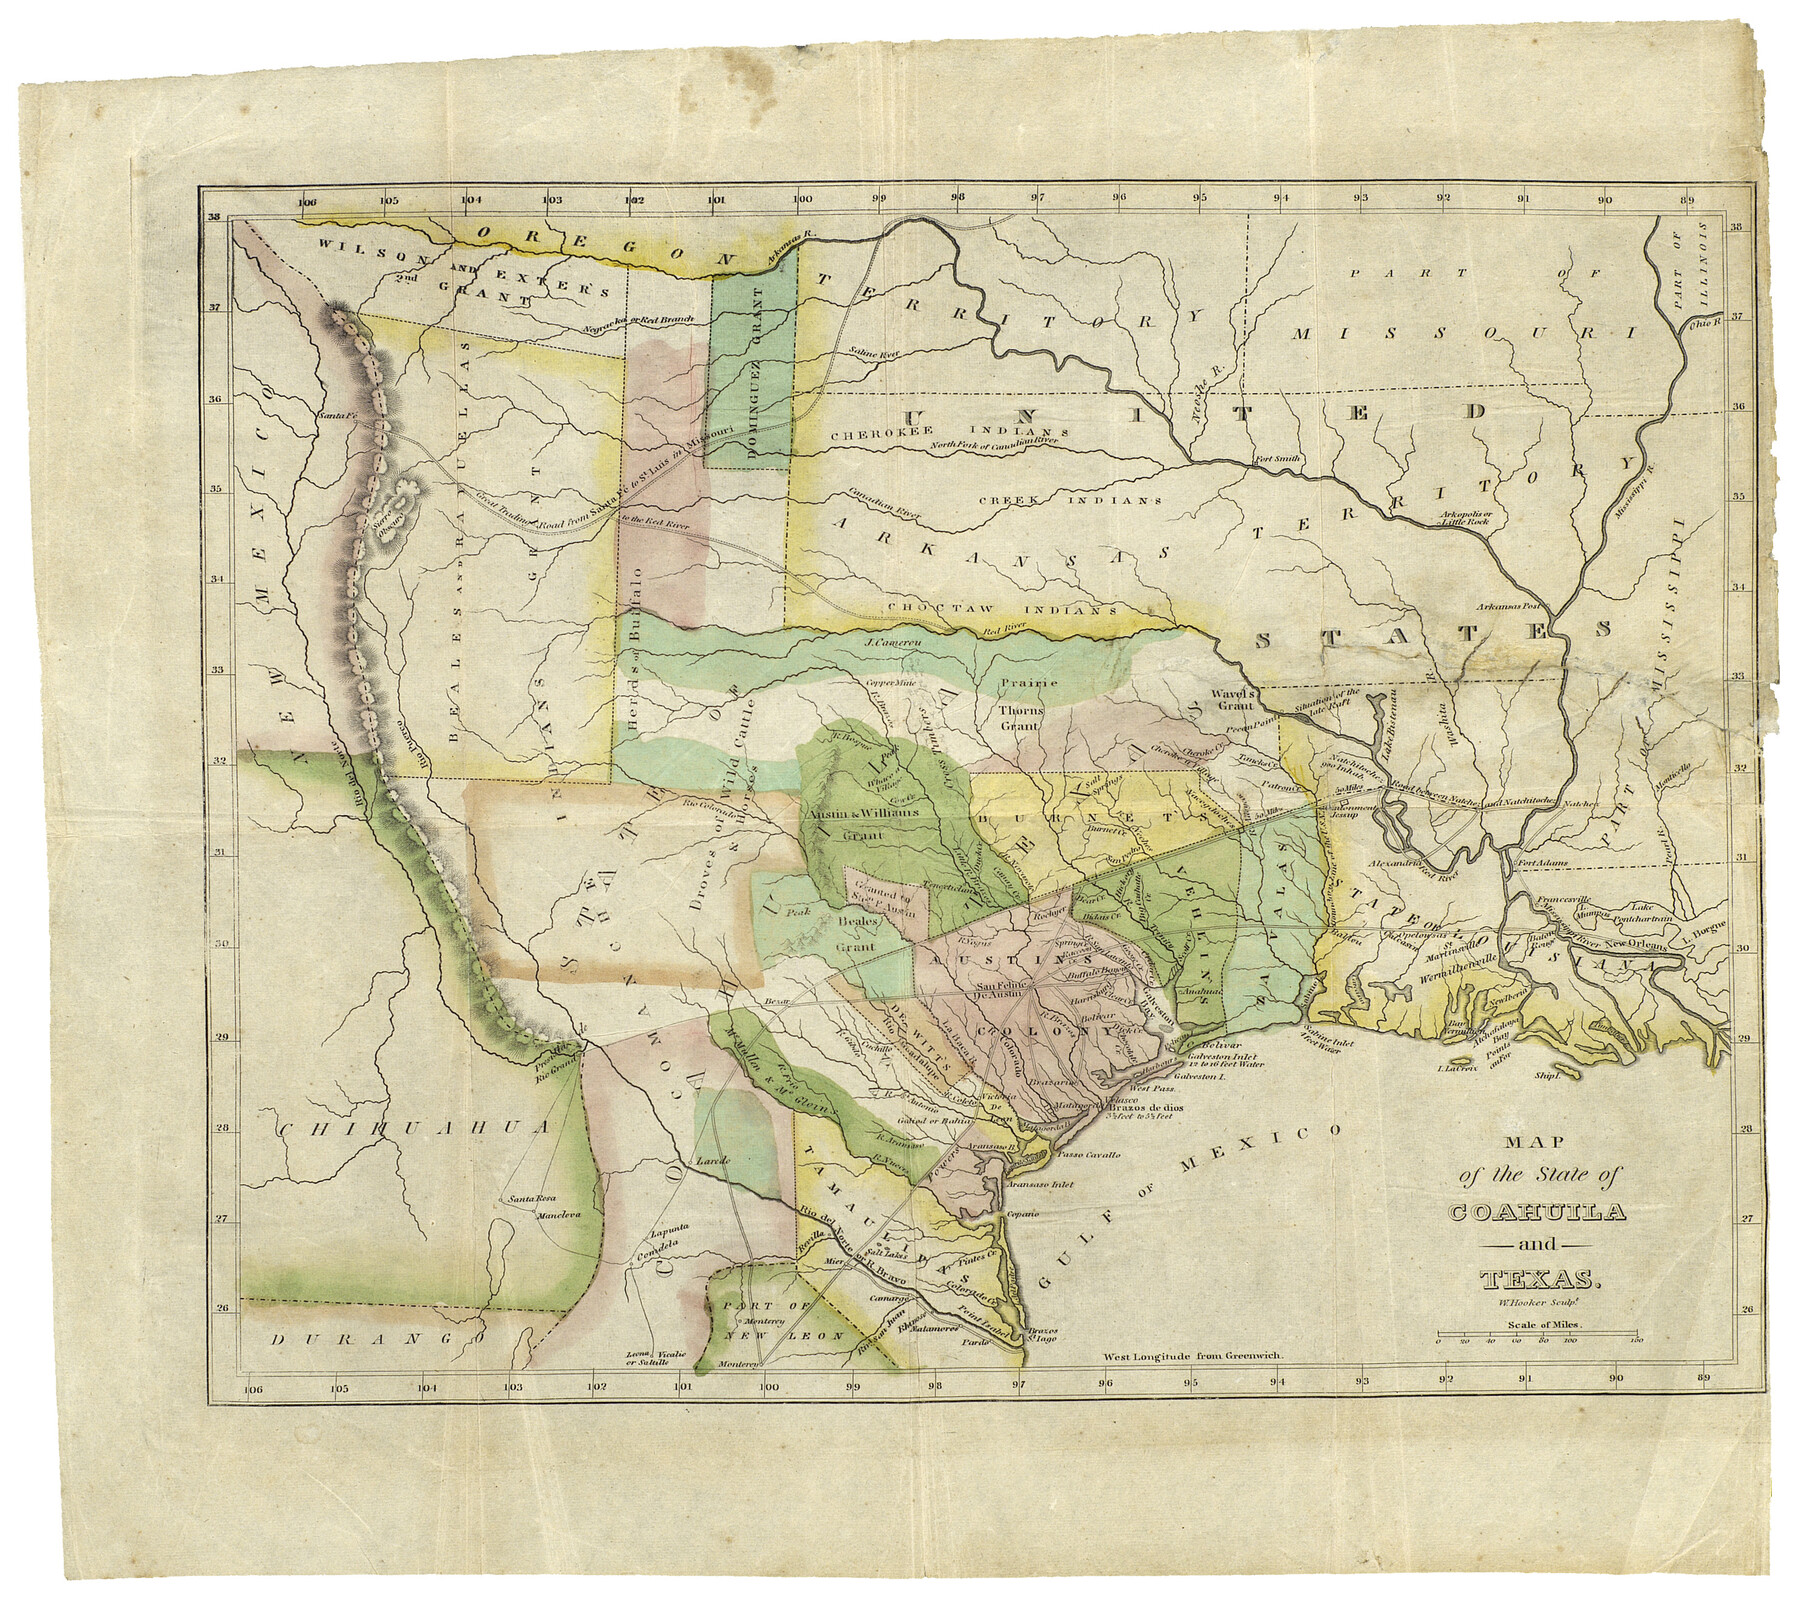 93848, Map of the State of Coahuila and Texas, Holcomb Digital Map Collection